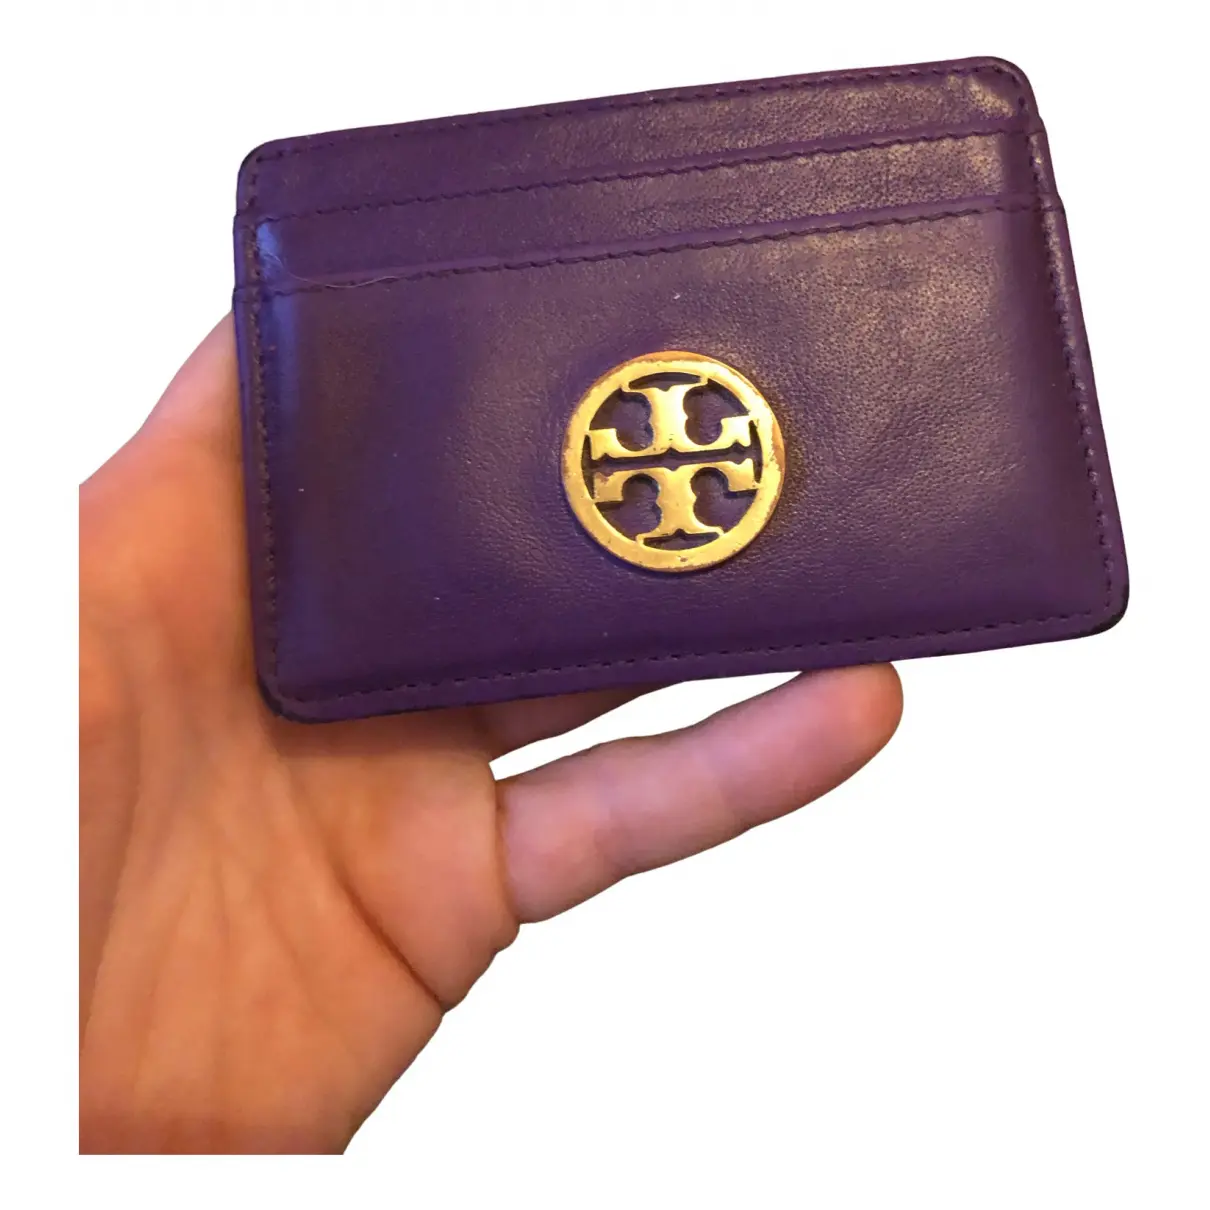 Leather wallet Tory Burch